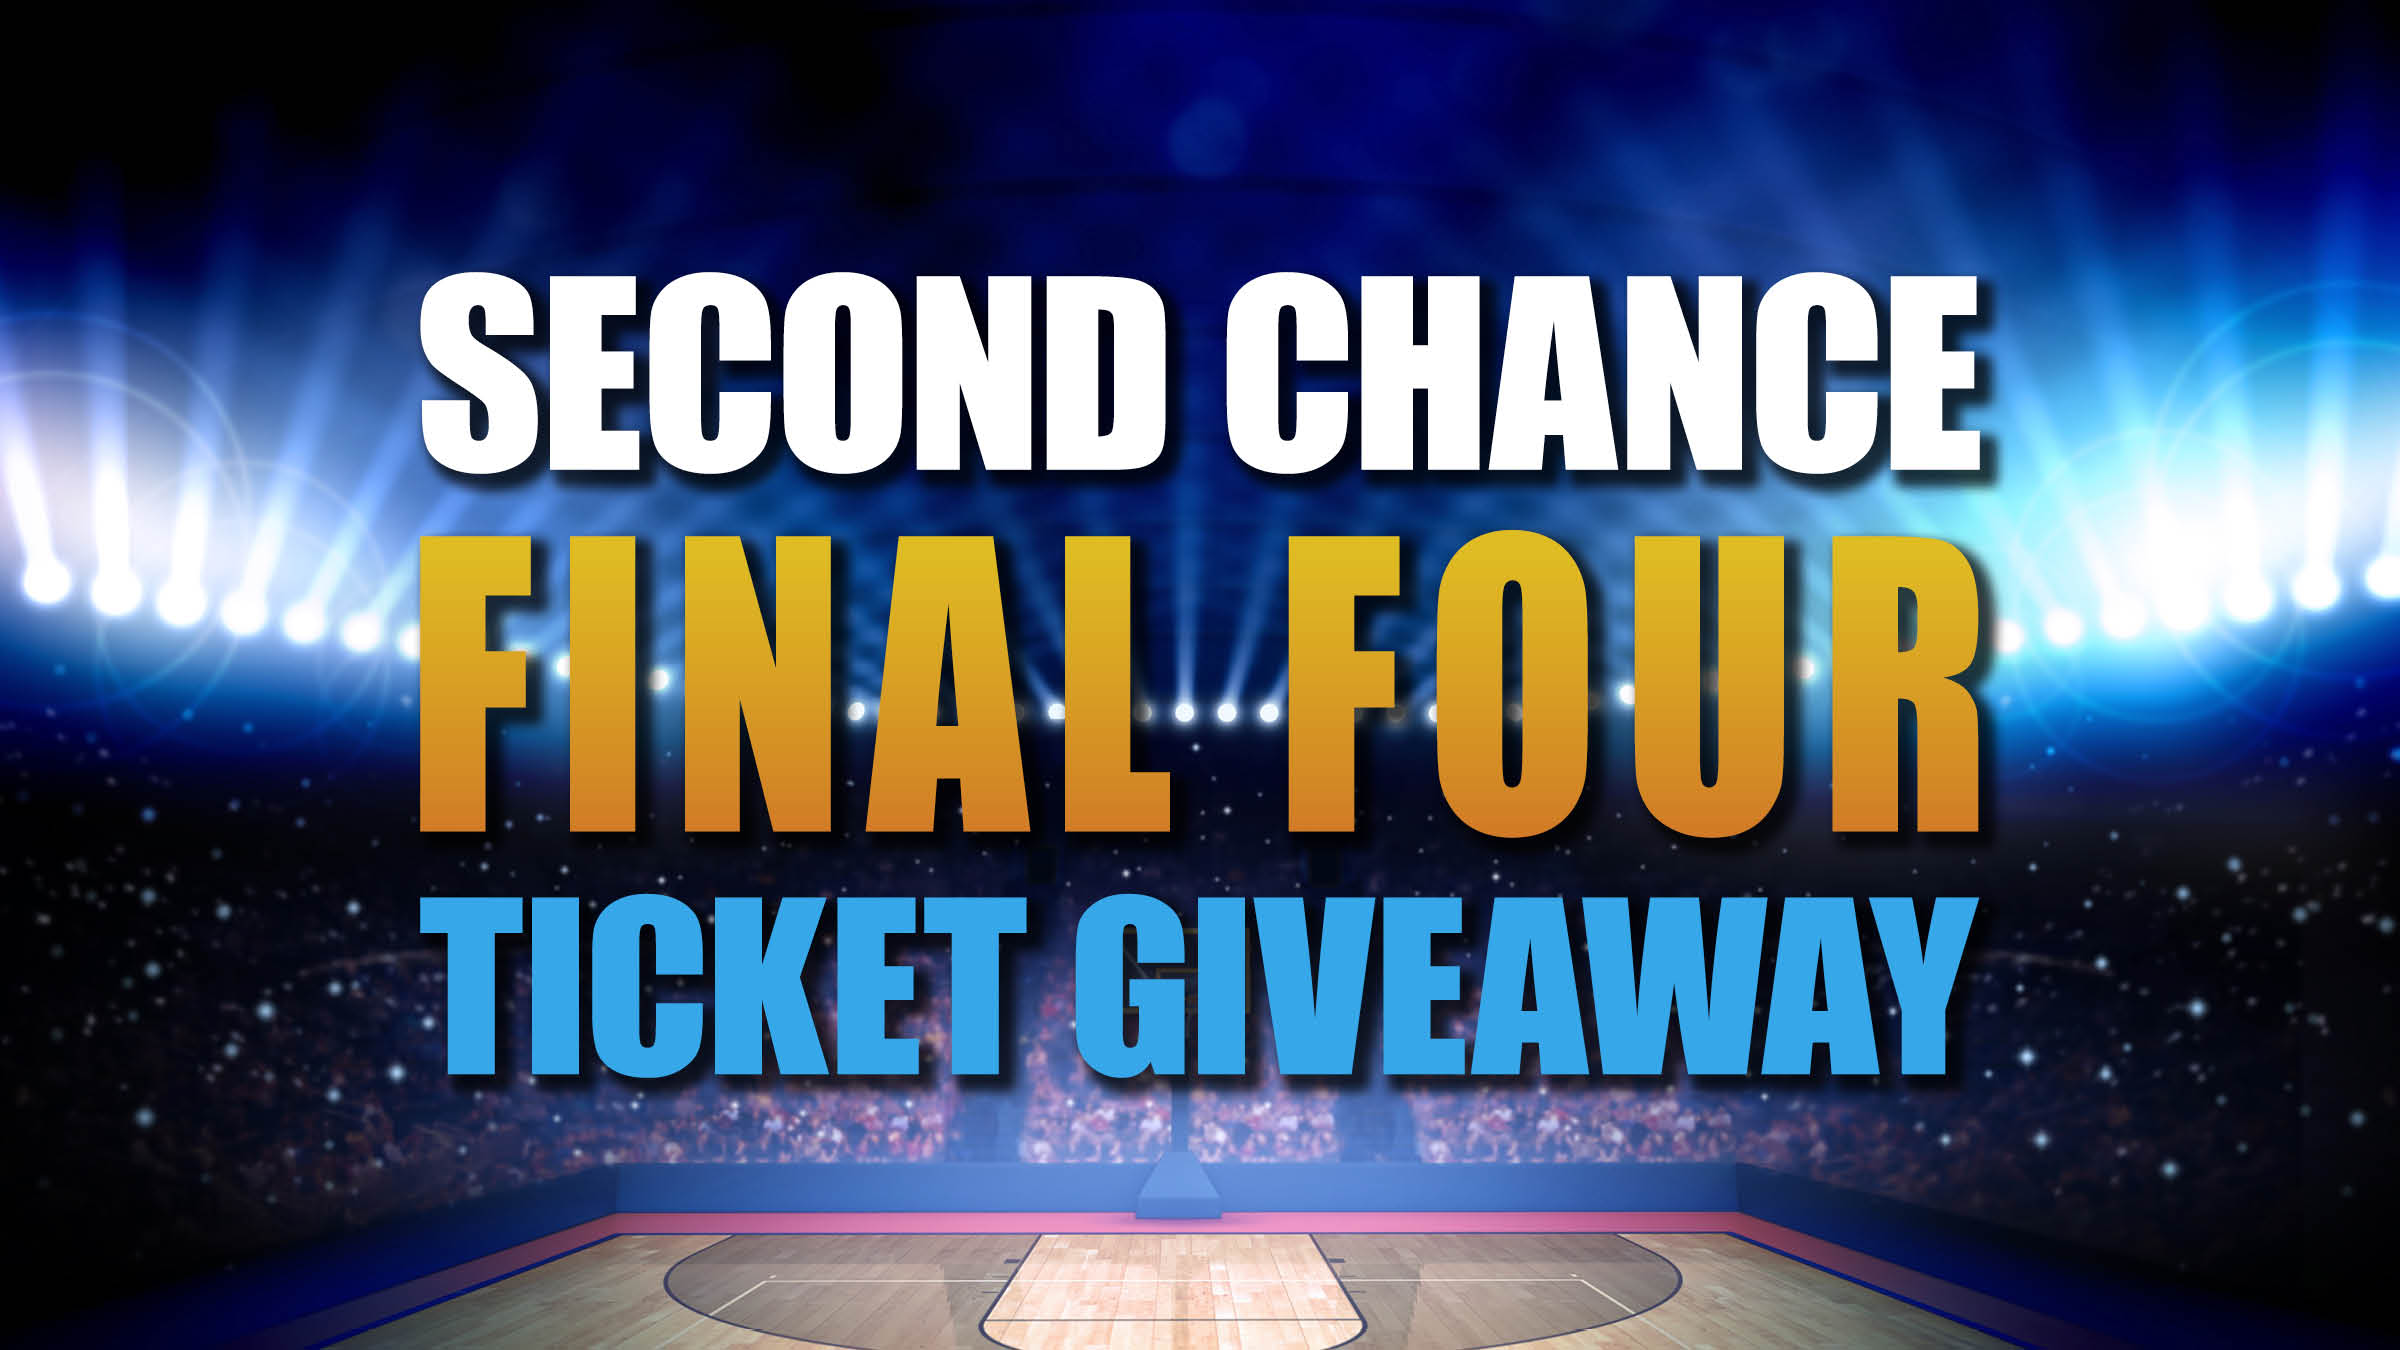 Second Chance Final Four Ticket Giveaway